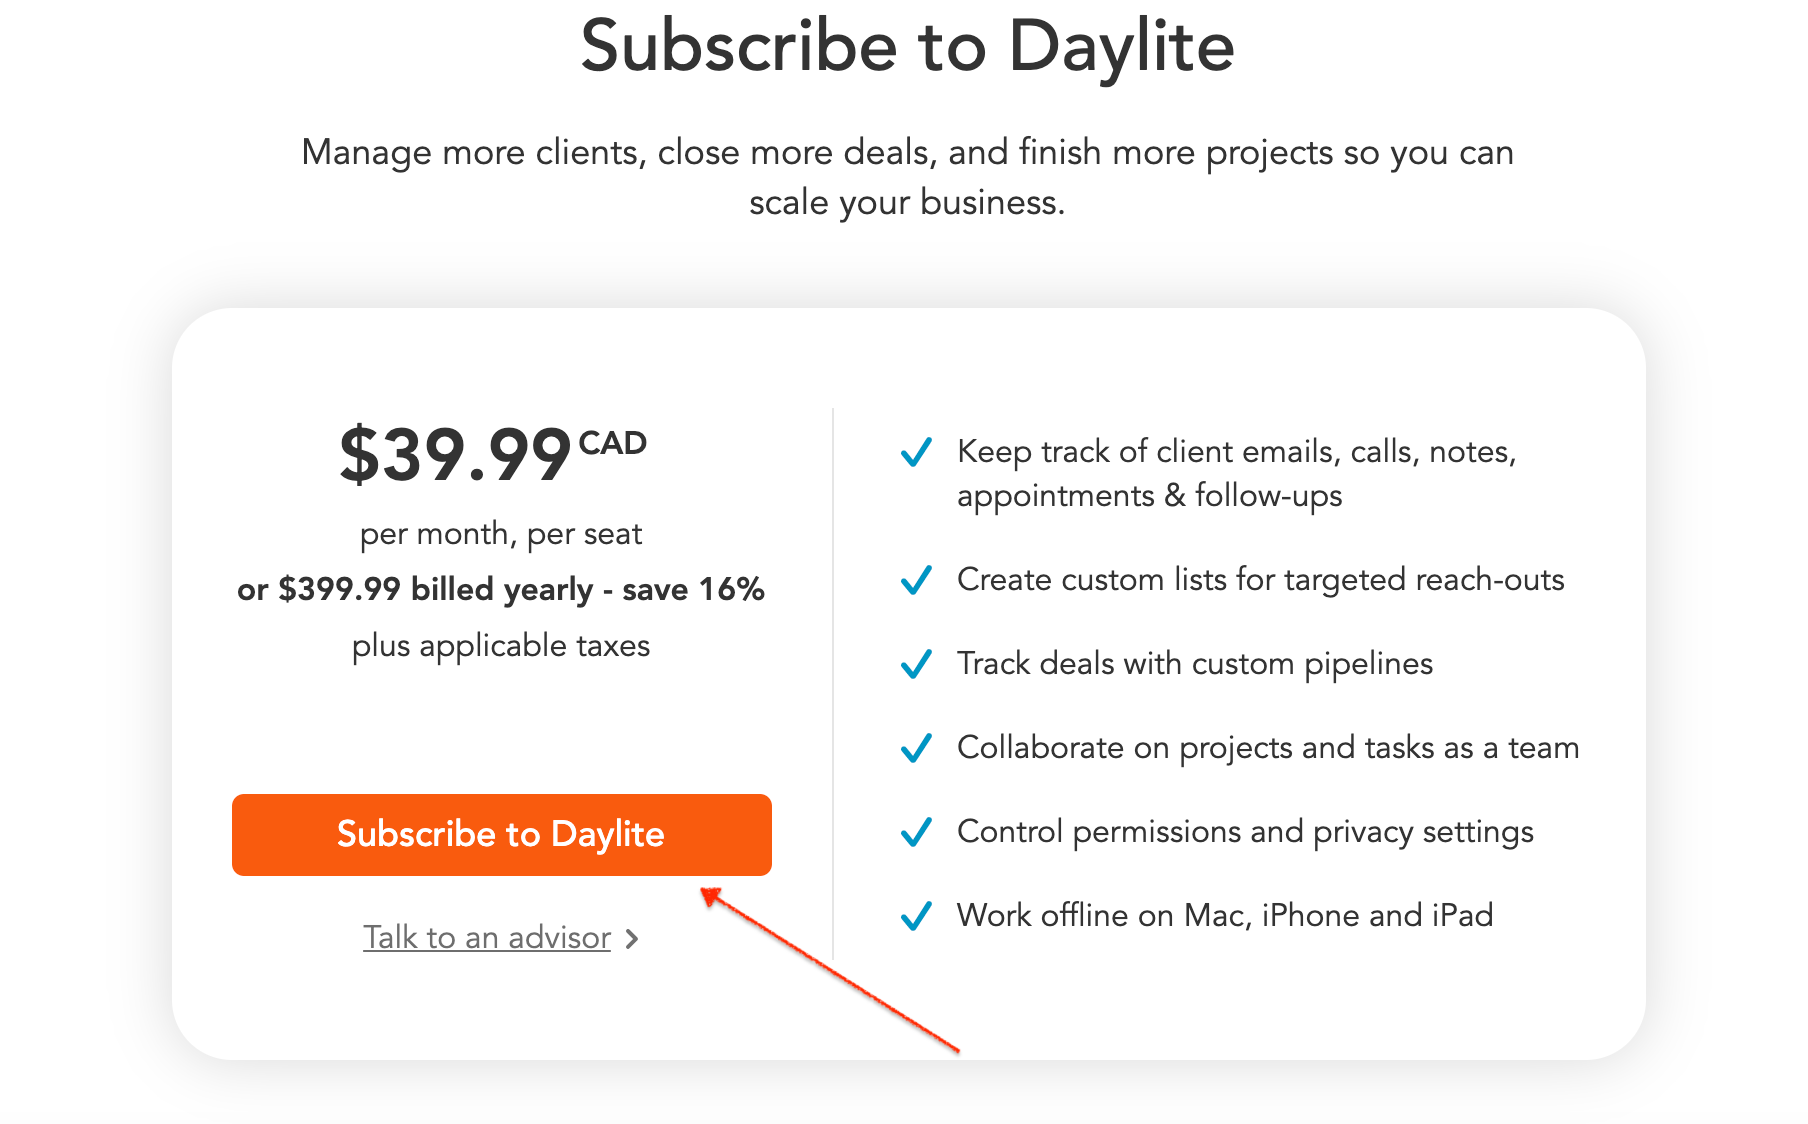 Subscribe to Daylite button